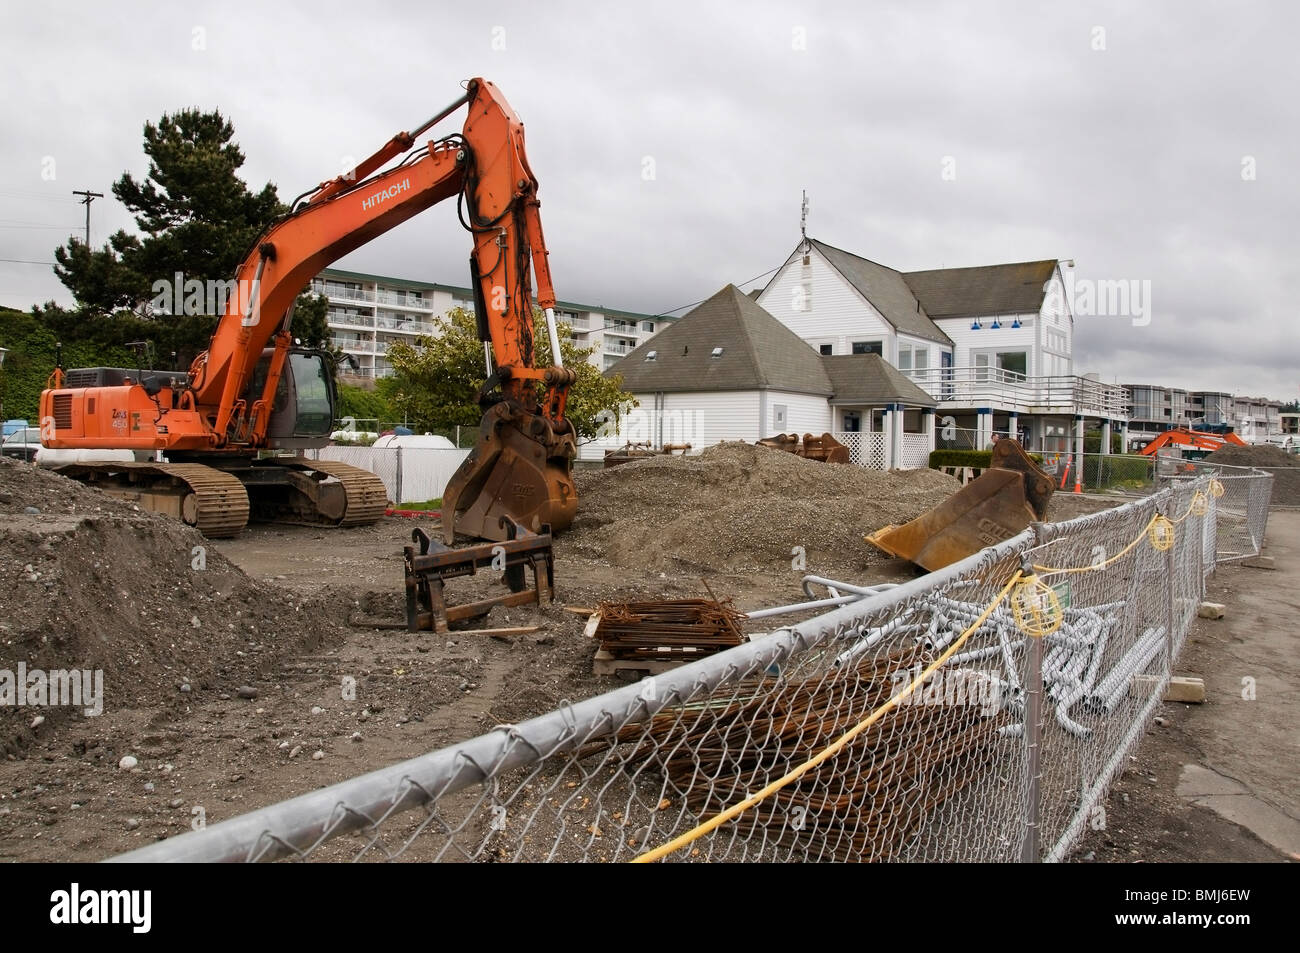 Construction site at the Des Moines Marina in Des Moines, Washington.  The marina office is visible in background. Stock Photo